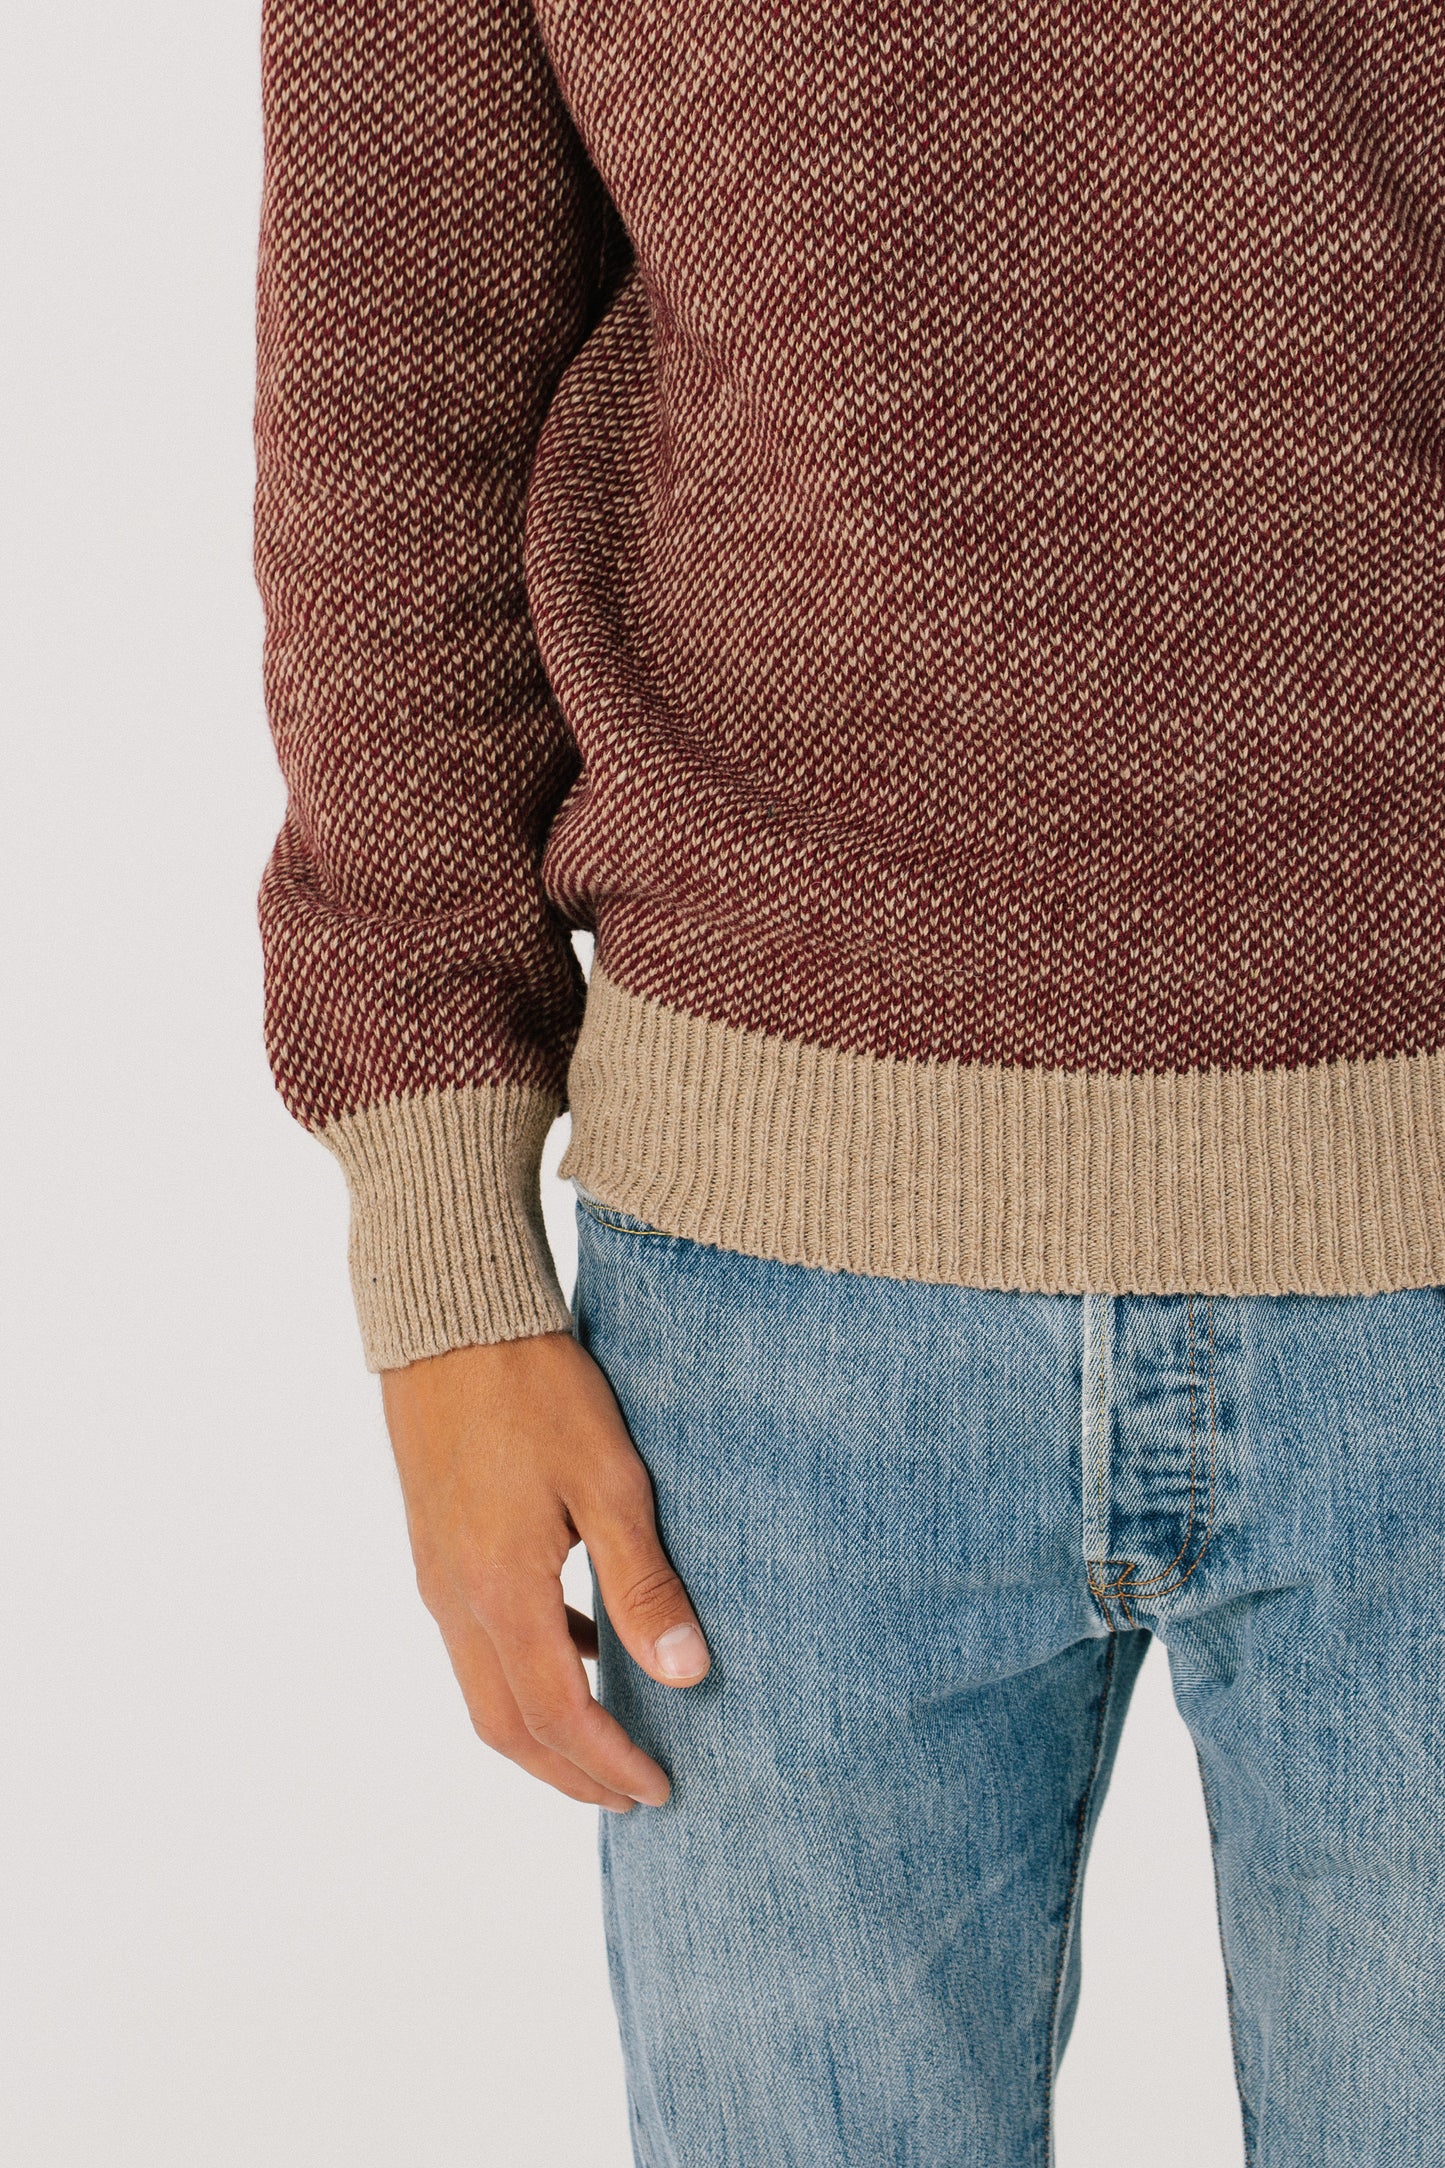 Detail of the bottom of the sweater. The cuffs are in camel color.